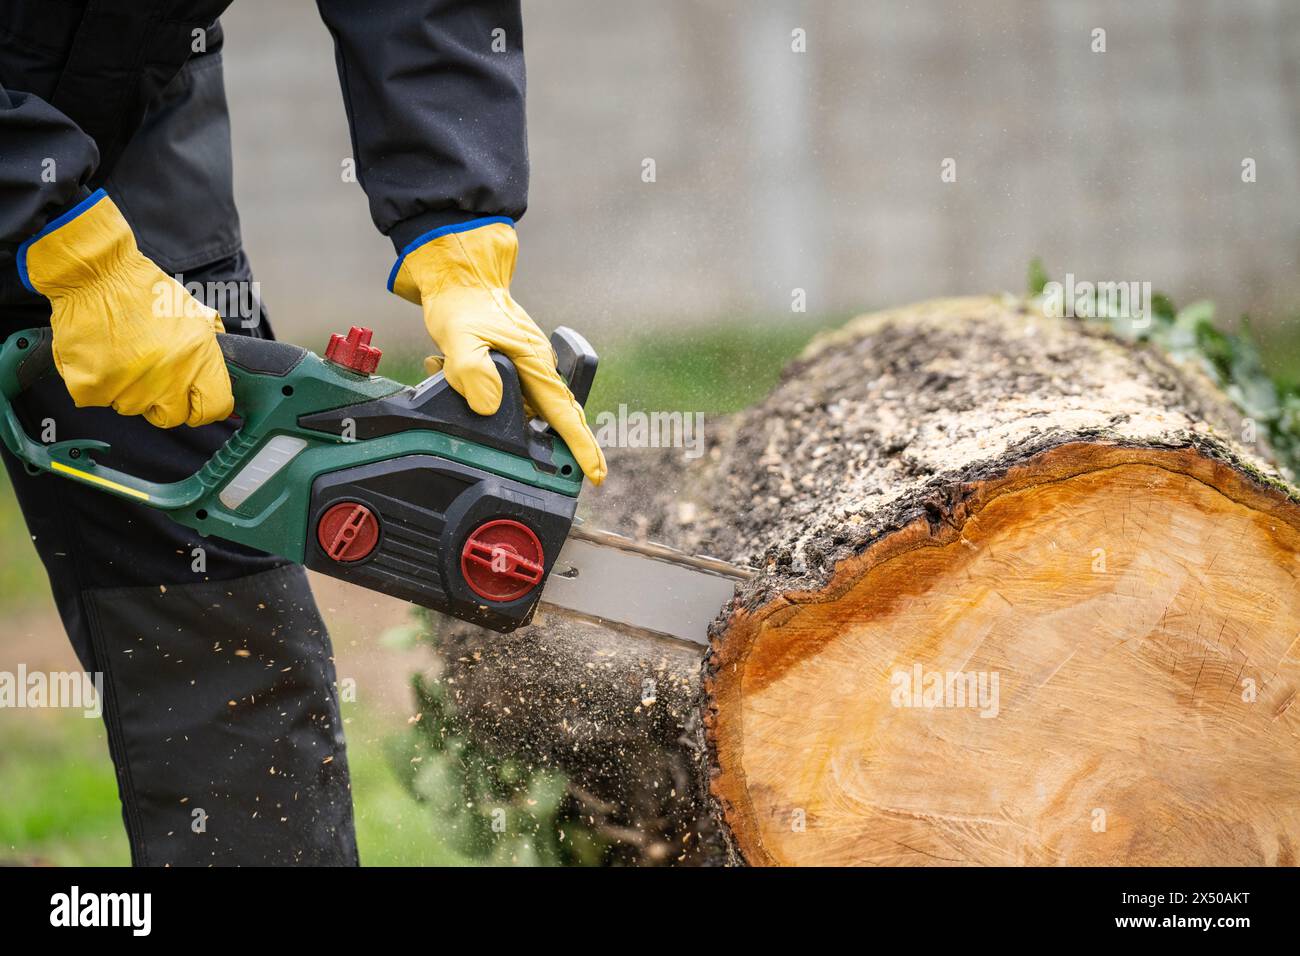 A man in uniform cuts an old tree in the yard with an electric saw Stock Photo